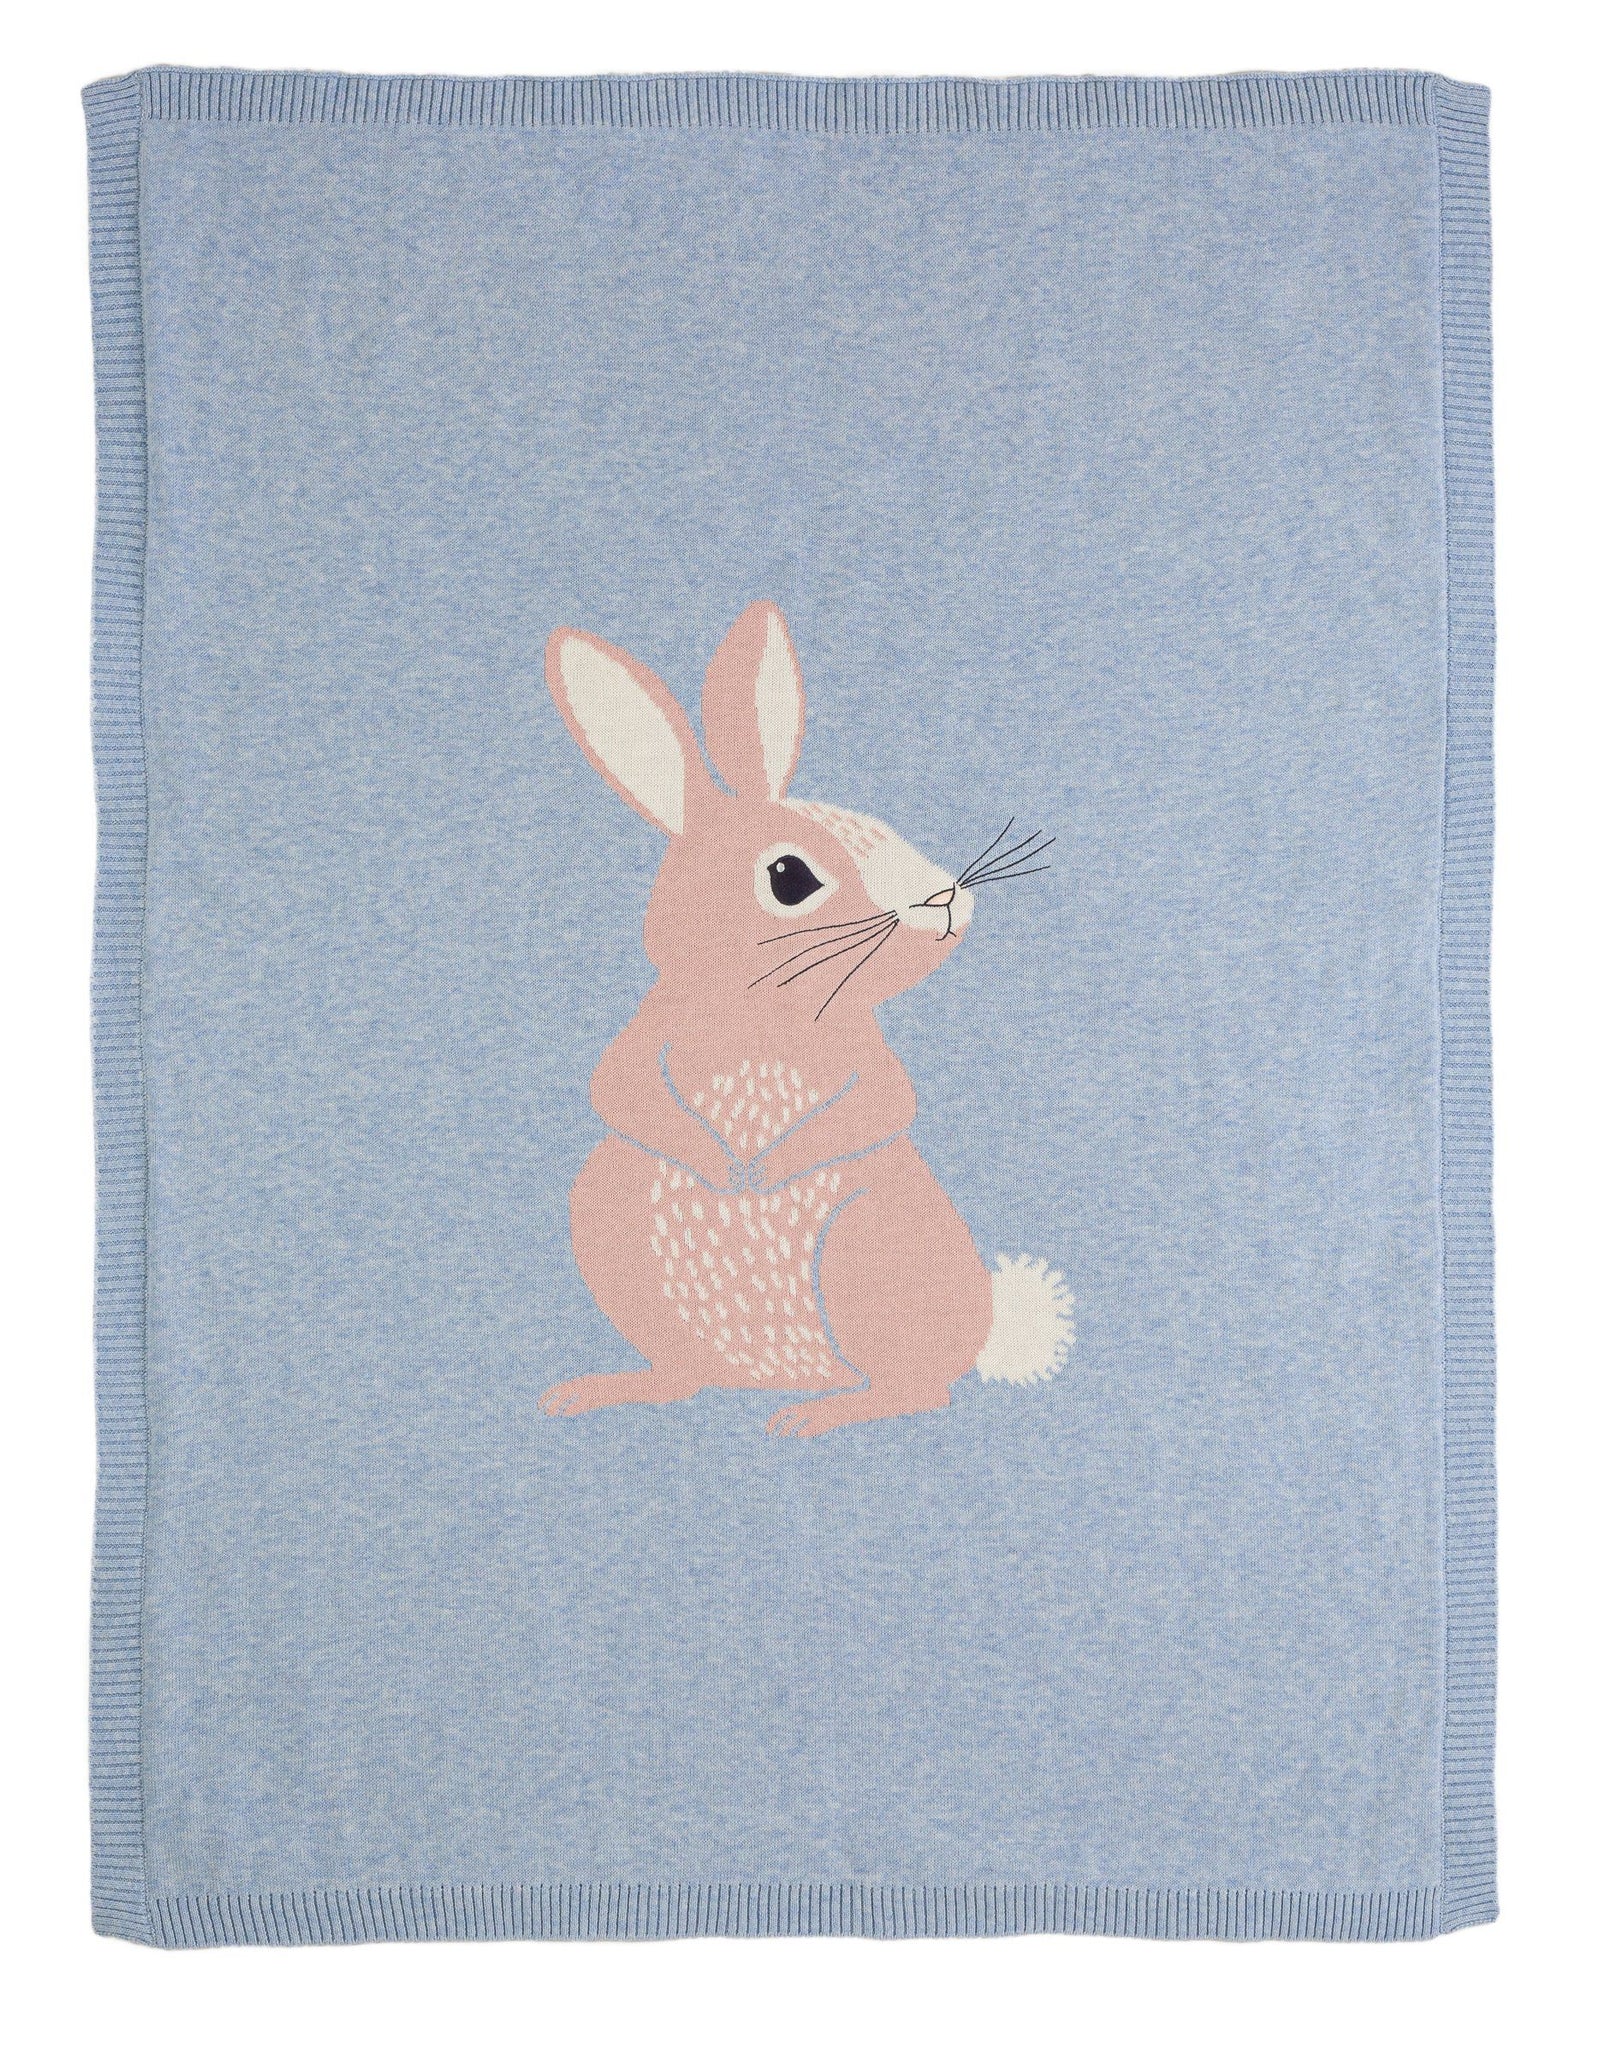 Personalised Baby Blanket - Cotton Tail Bunny